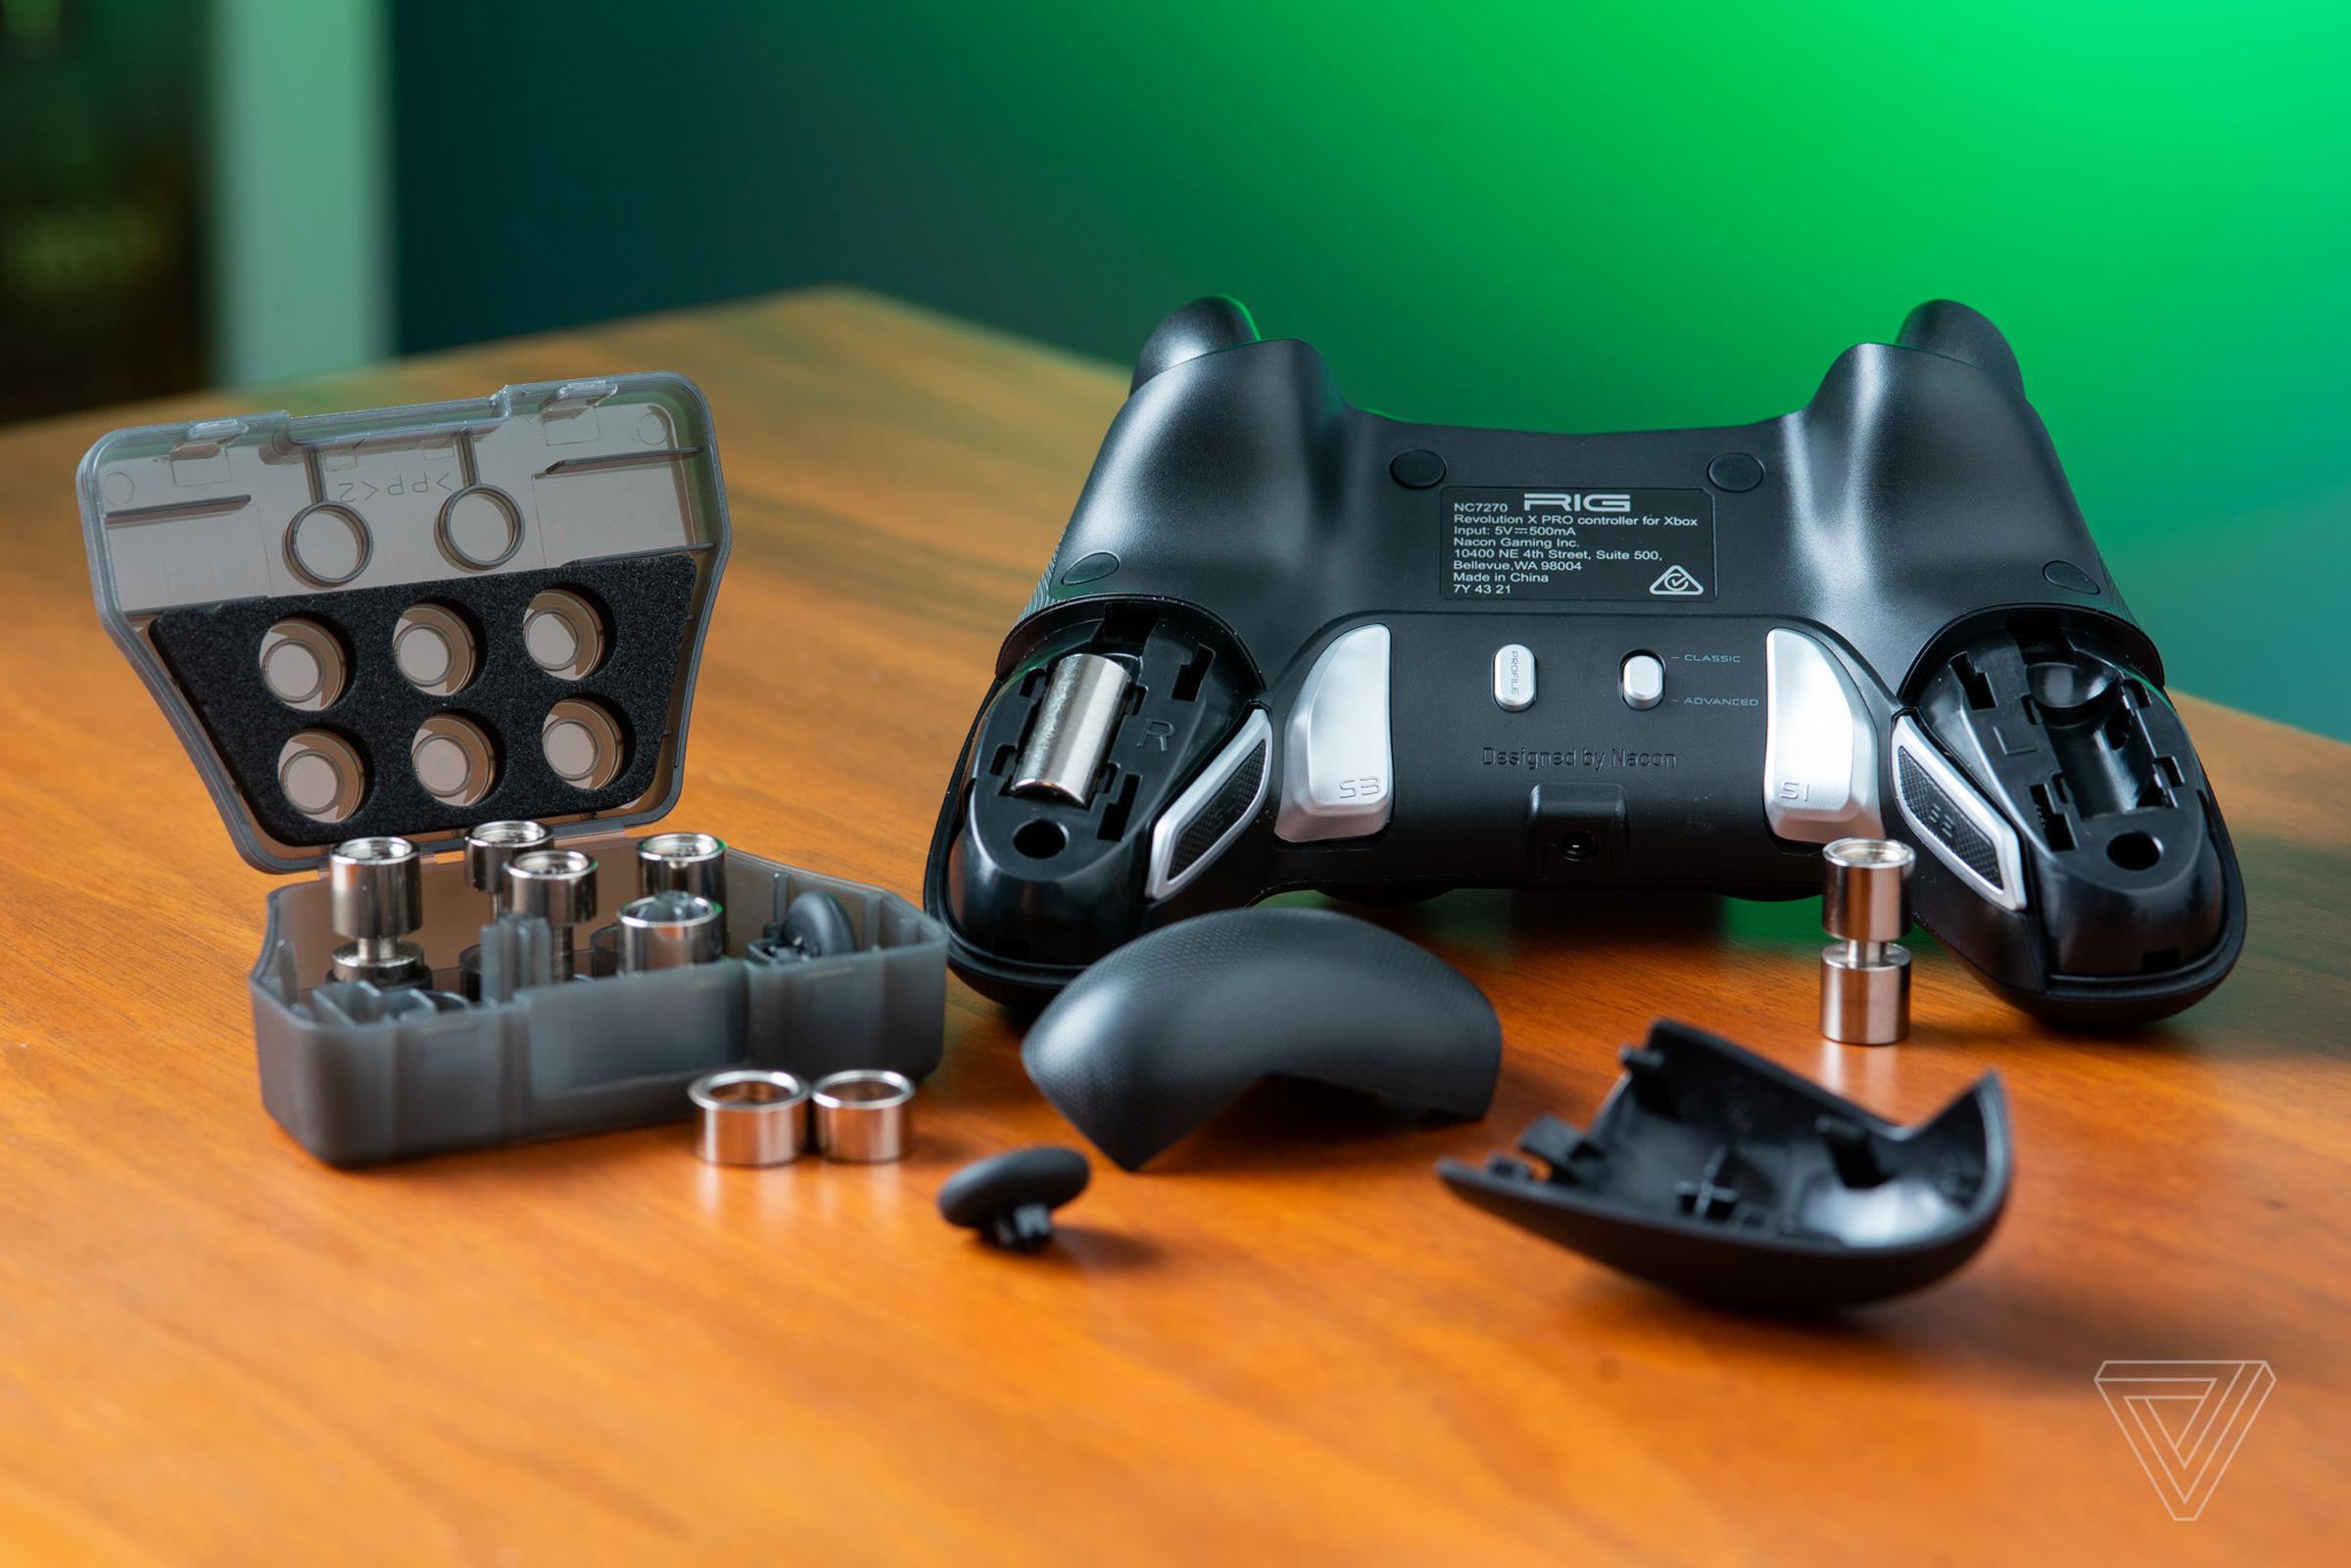 The rear of the Nacon Revolution X controller with its swappable weights and thumb stick toppers.